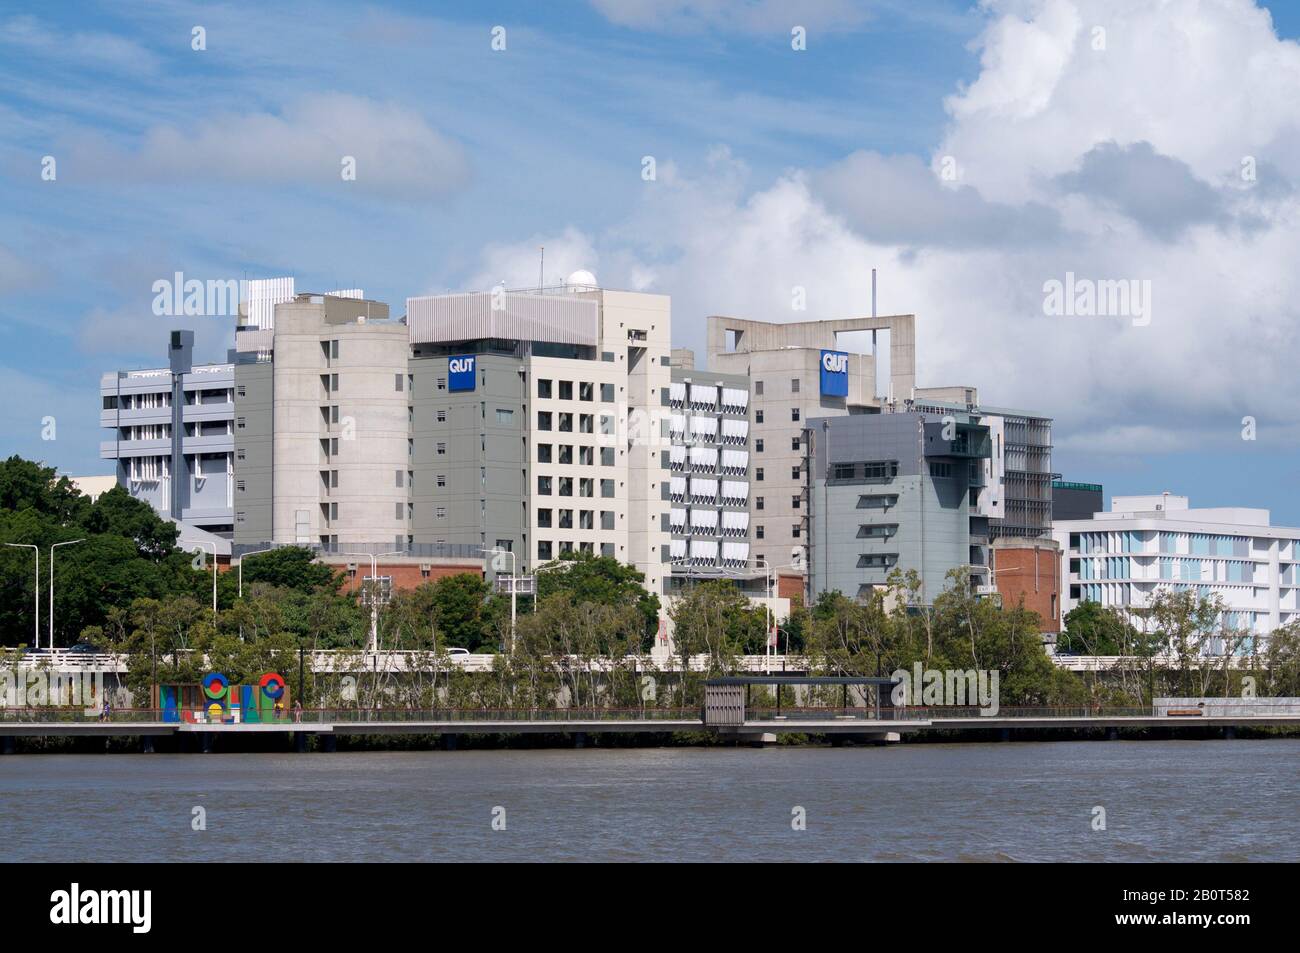 Brisbane, Queensland, Australia - 27th January 2020 : View of the QUT (Queensland University of Technology) campus seen from South Bank Parklands in B Stock Photo